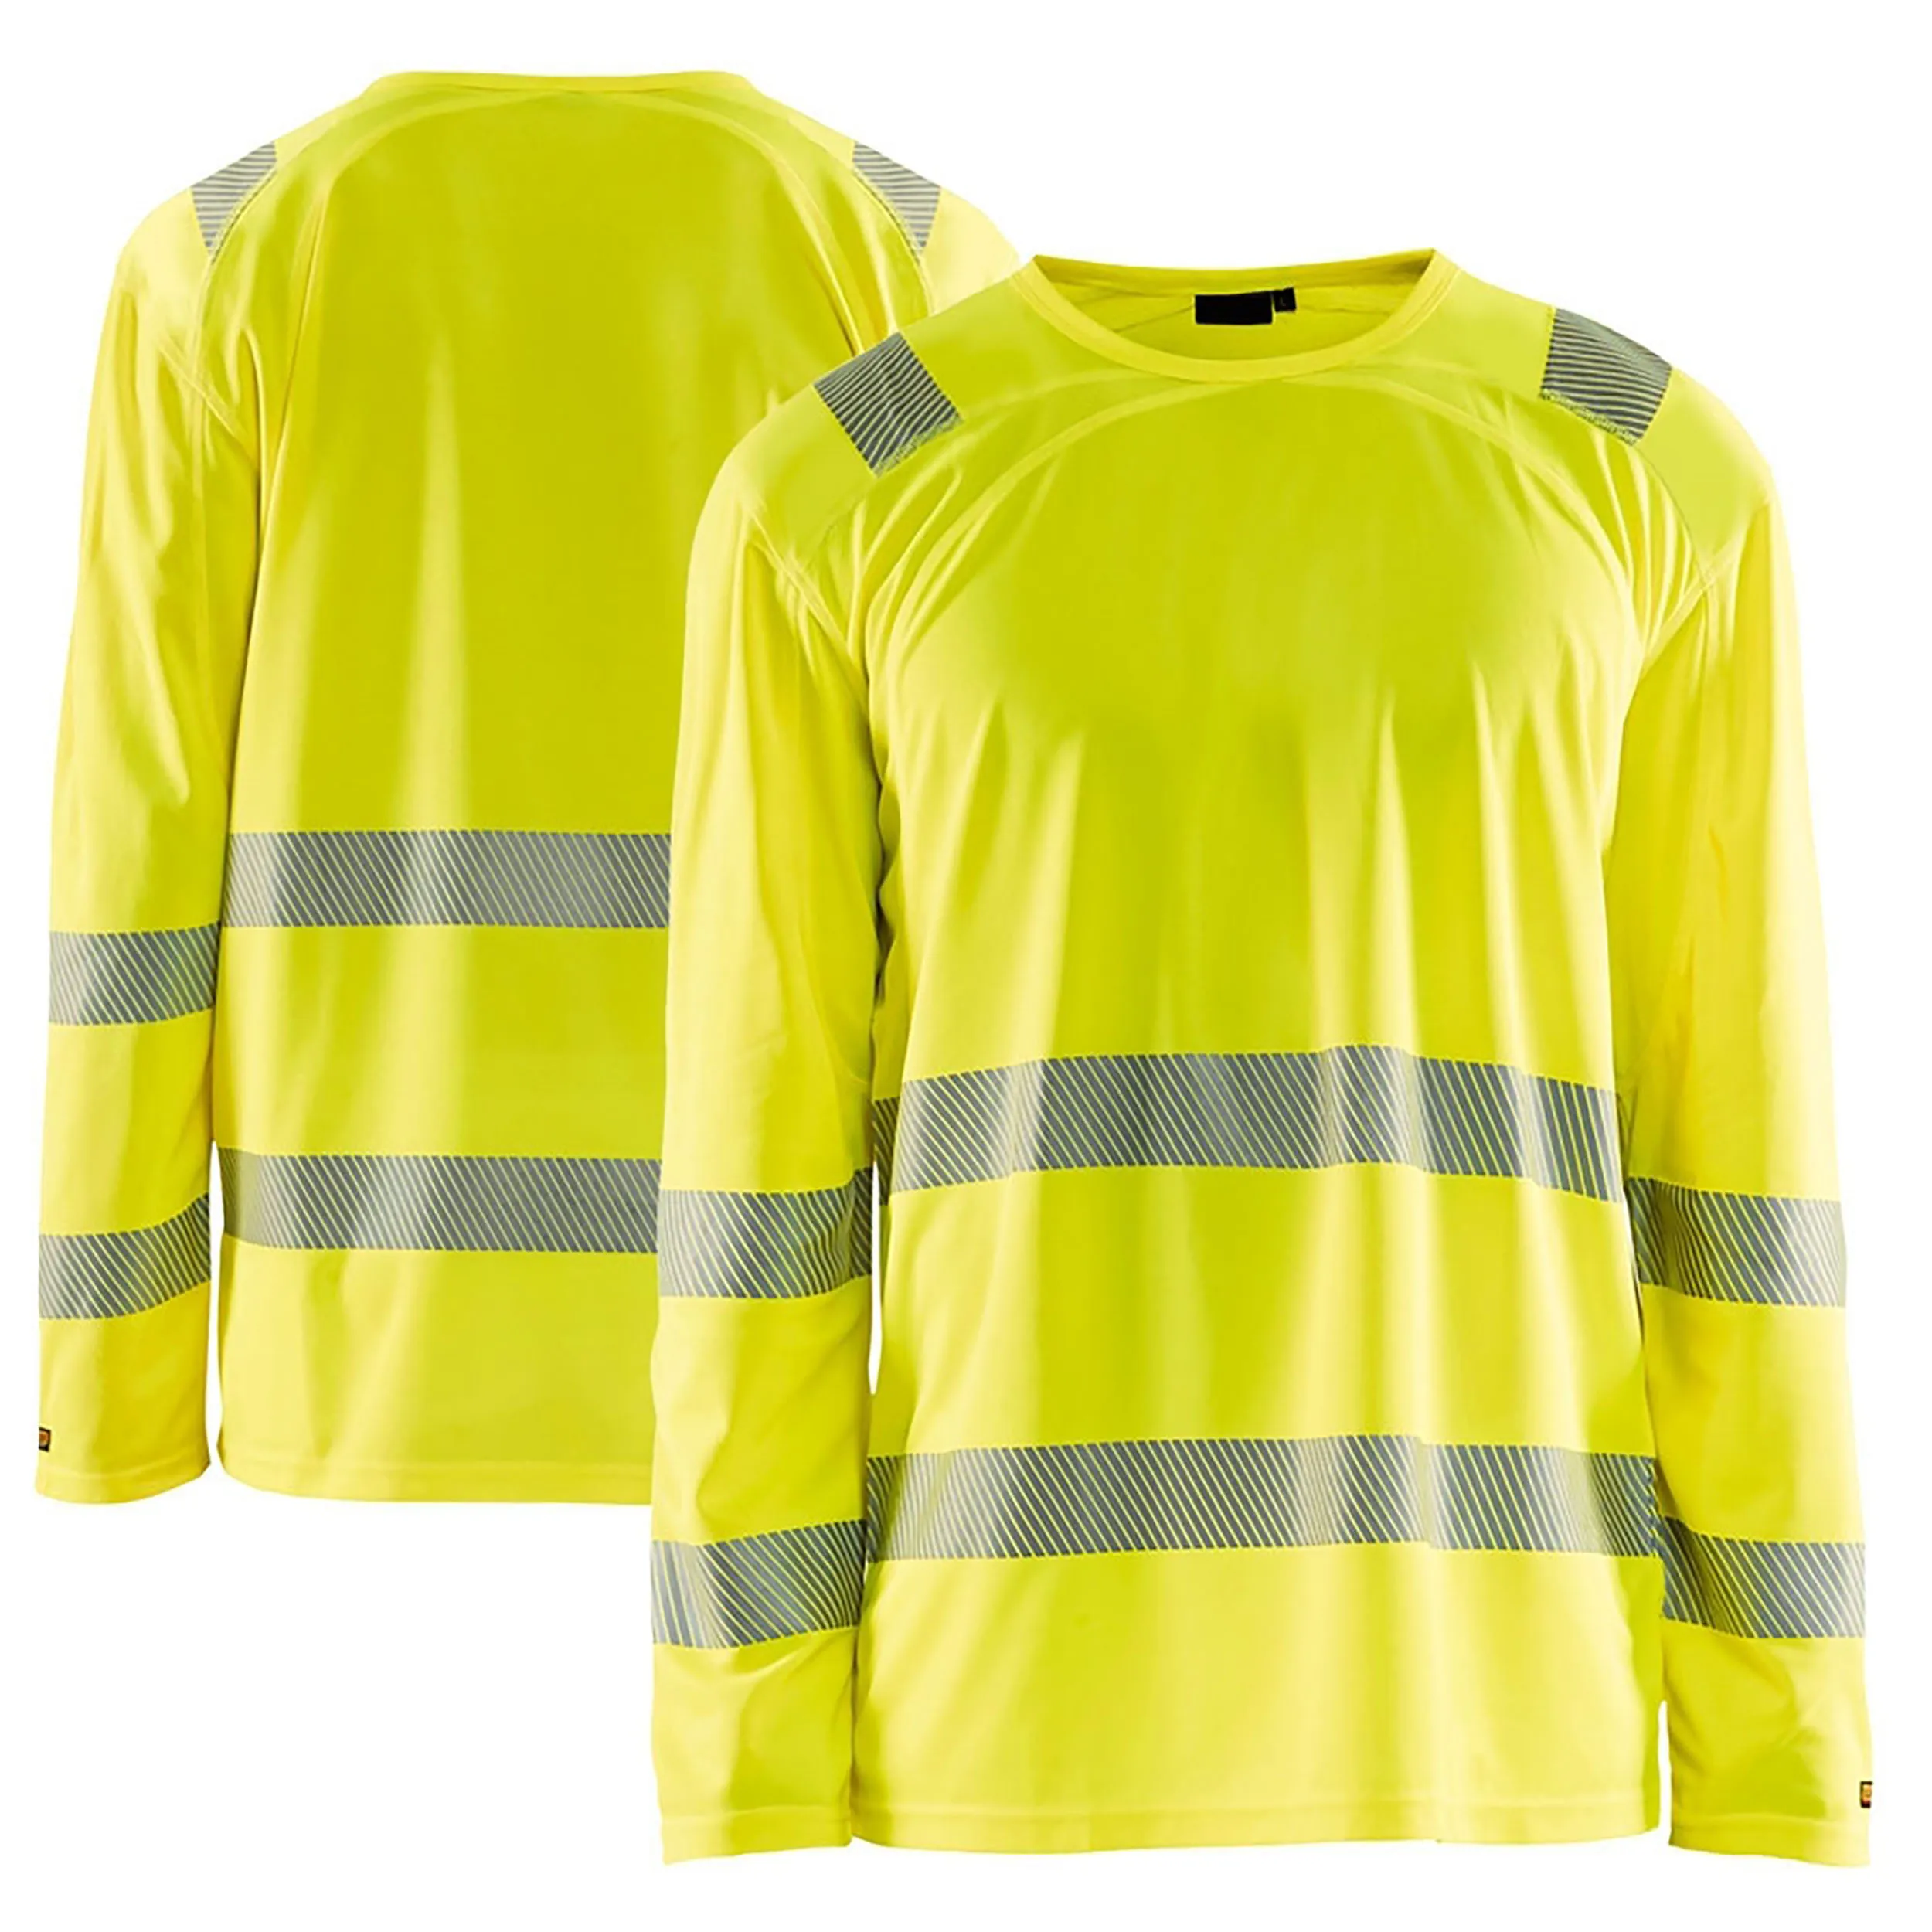 

Hi-Vis Reflective Clothing Workwear O-Neck Men's knitted bright safety cool polyester shirts safety t shirts